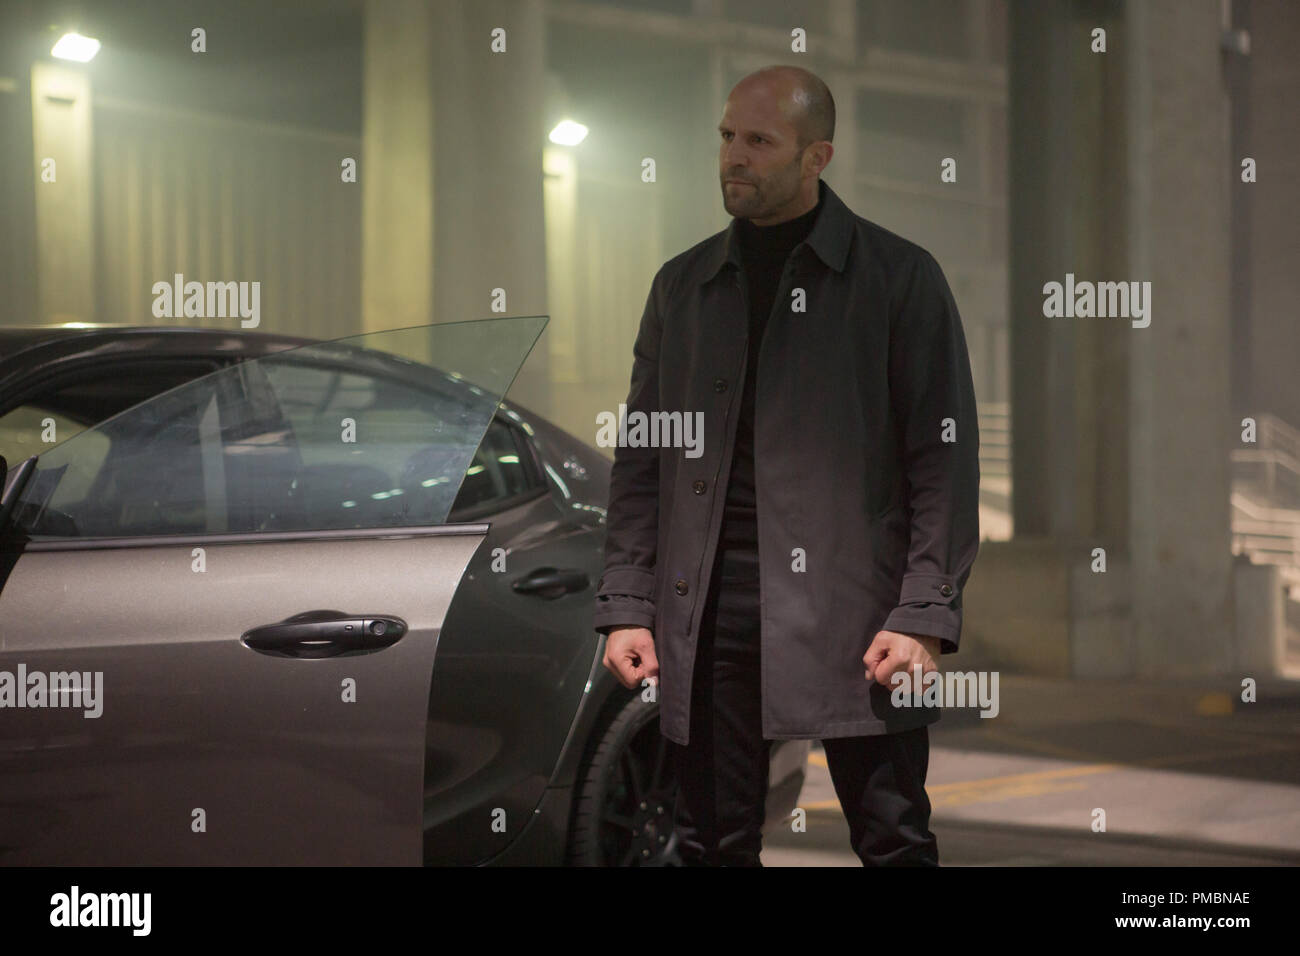 JASON STATHAM as Deckard Shaw in 'Furious 7'. Continuing the global exploits in the unstoppable franchise built on speed, James Wan directs this chapter of the hugely successful series. Stock Photo